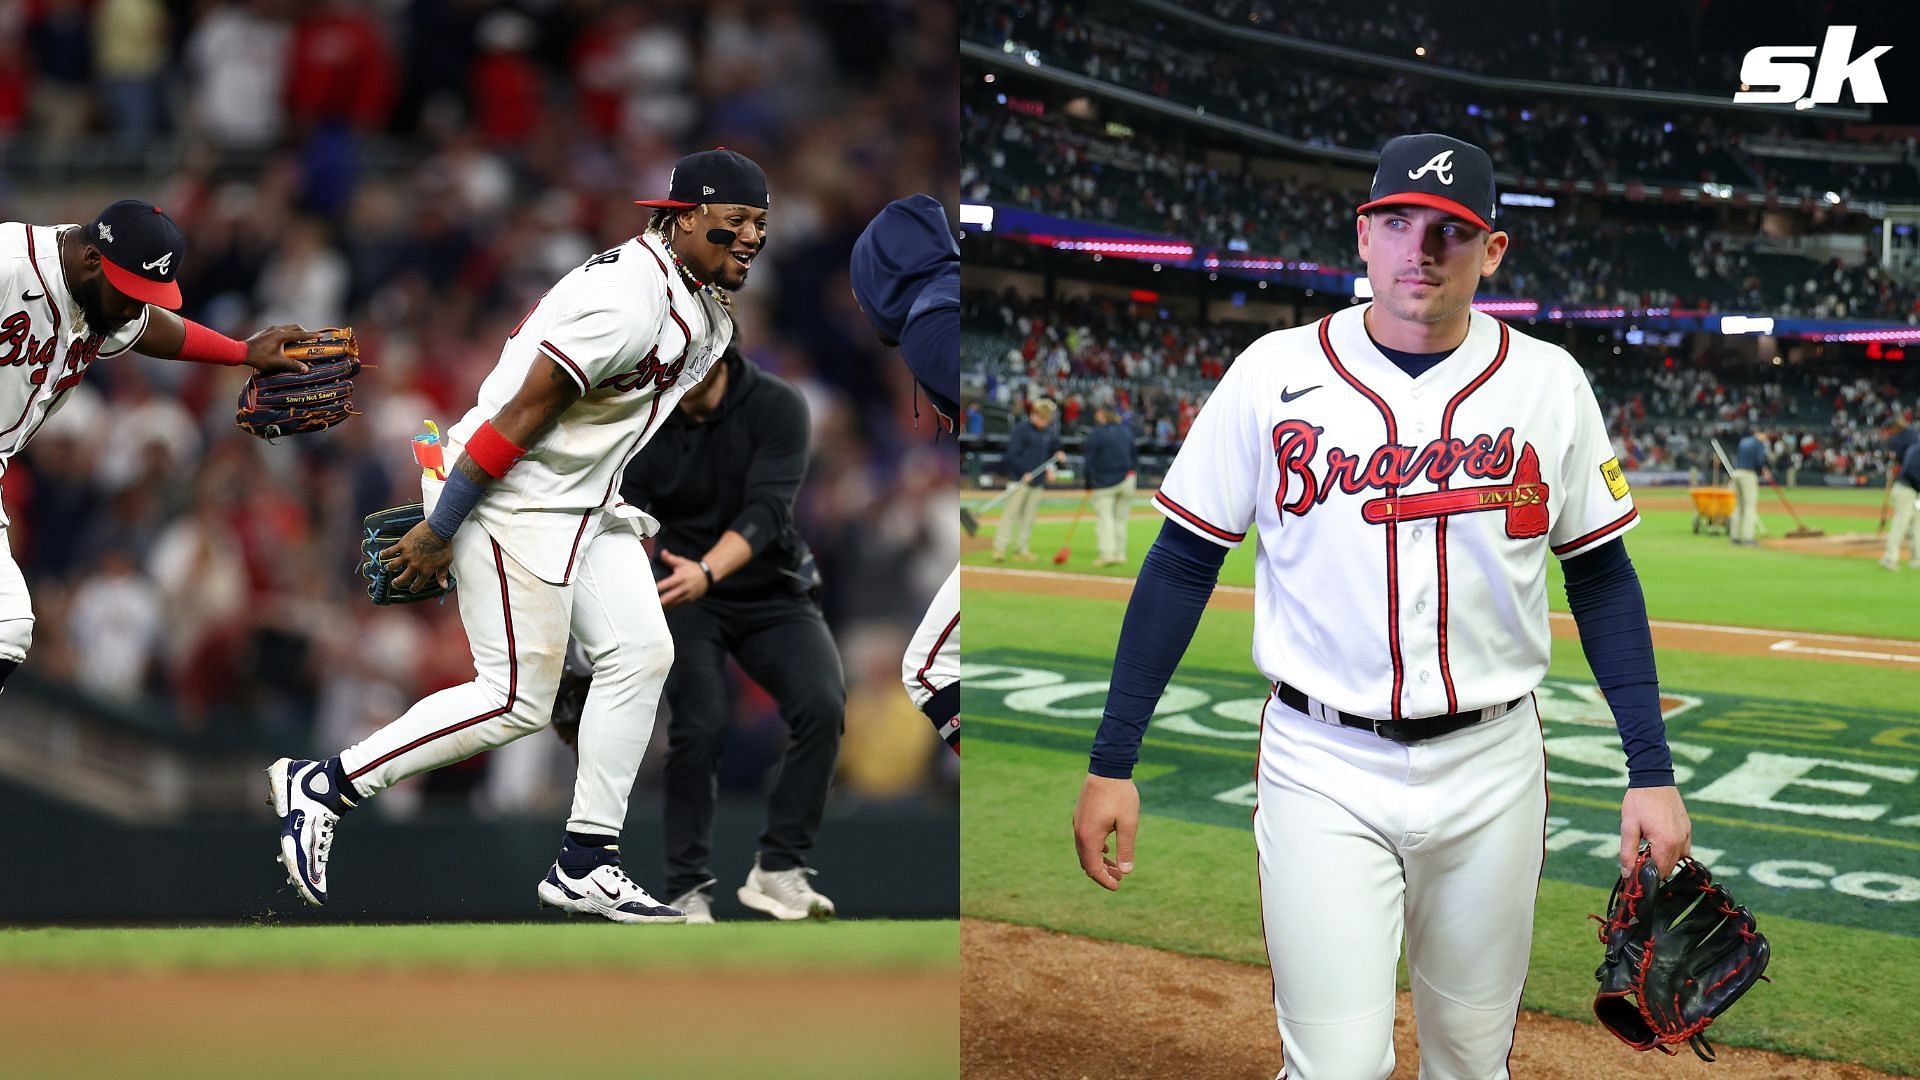 Atlanta Braves save their season with a WILD Game 2 win over the